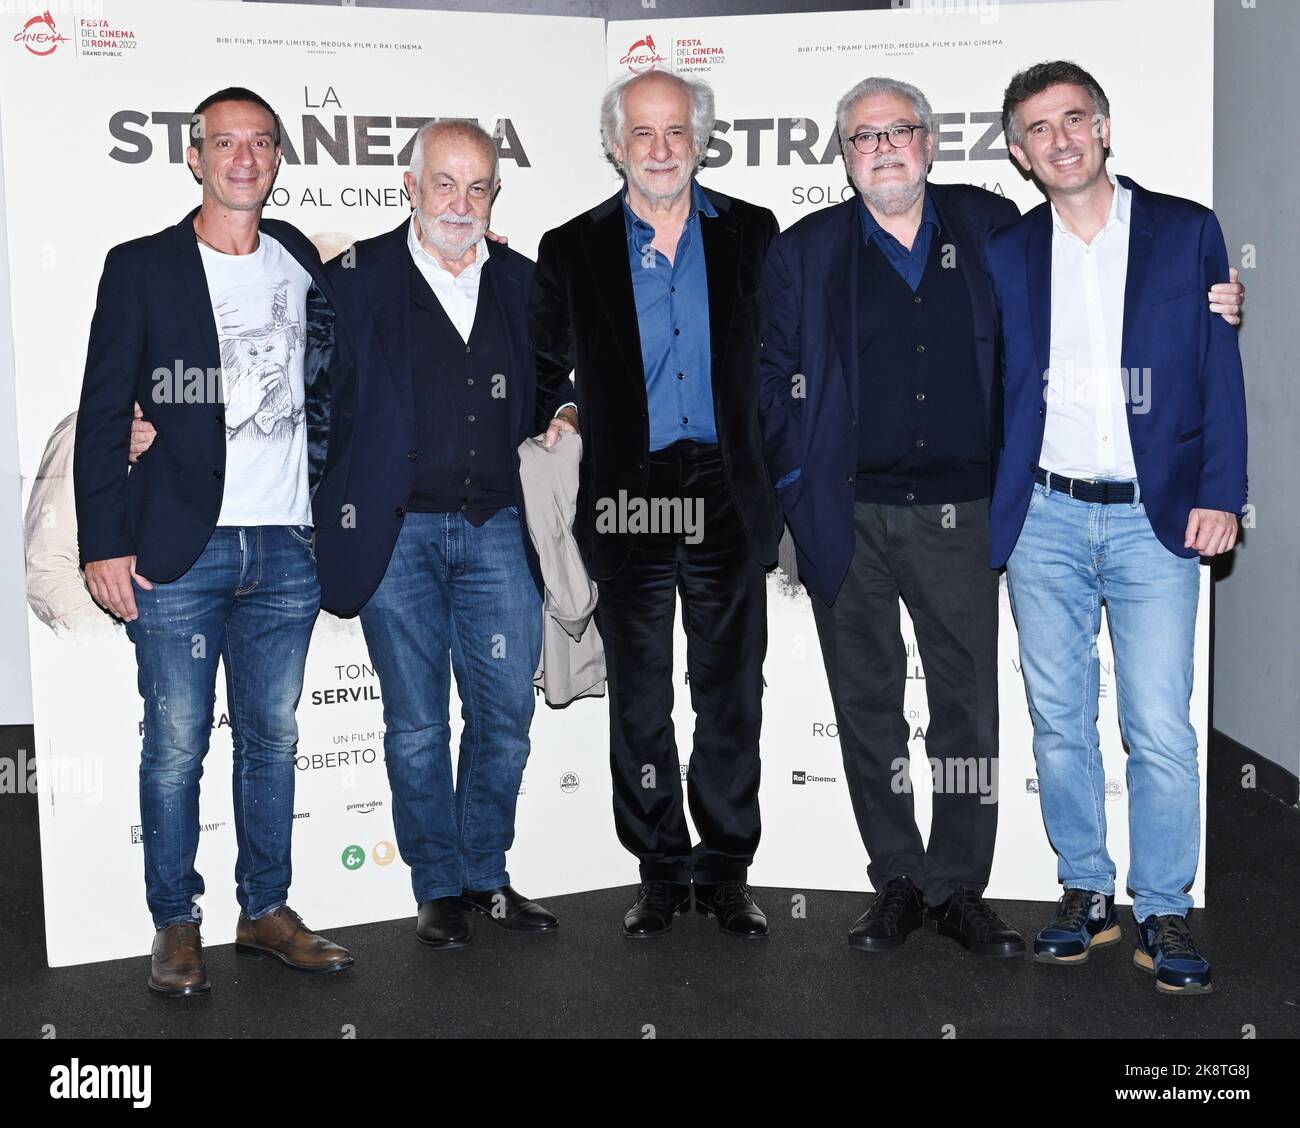 Milan, Italy. 24th Oct, 2022. Milan, Italy The strangeness feature by Roberto Andò, premiered at the Rome Film Festival with leading actors Toni Servillo, Ficarra and Picone In the picture: Roberto Andò, Toni Servillo, Ficarra and Picone with Gianni Canova Credit: Independent Photo Agency/Alamy Live News Stock Photo